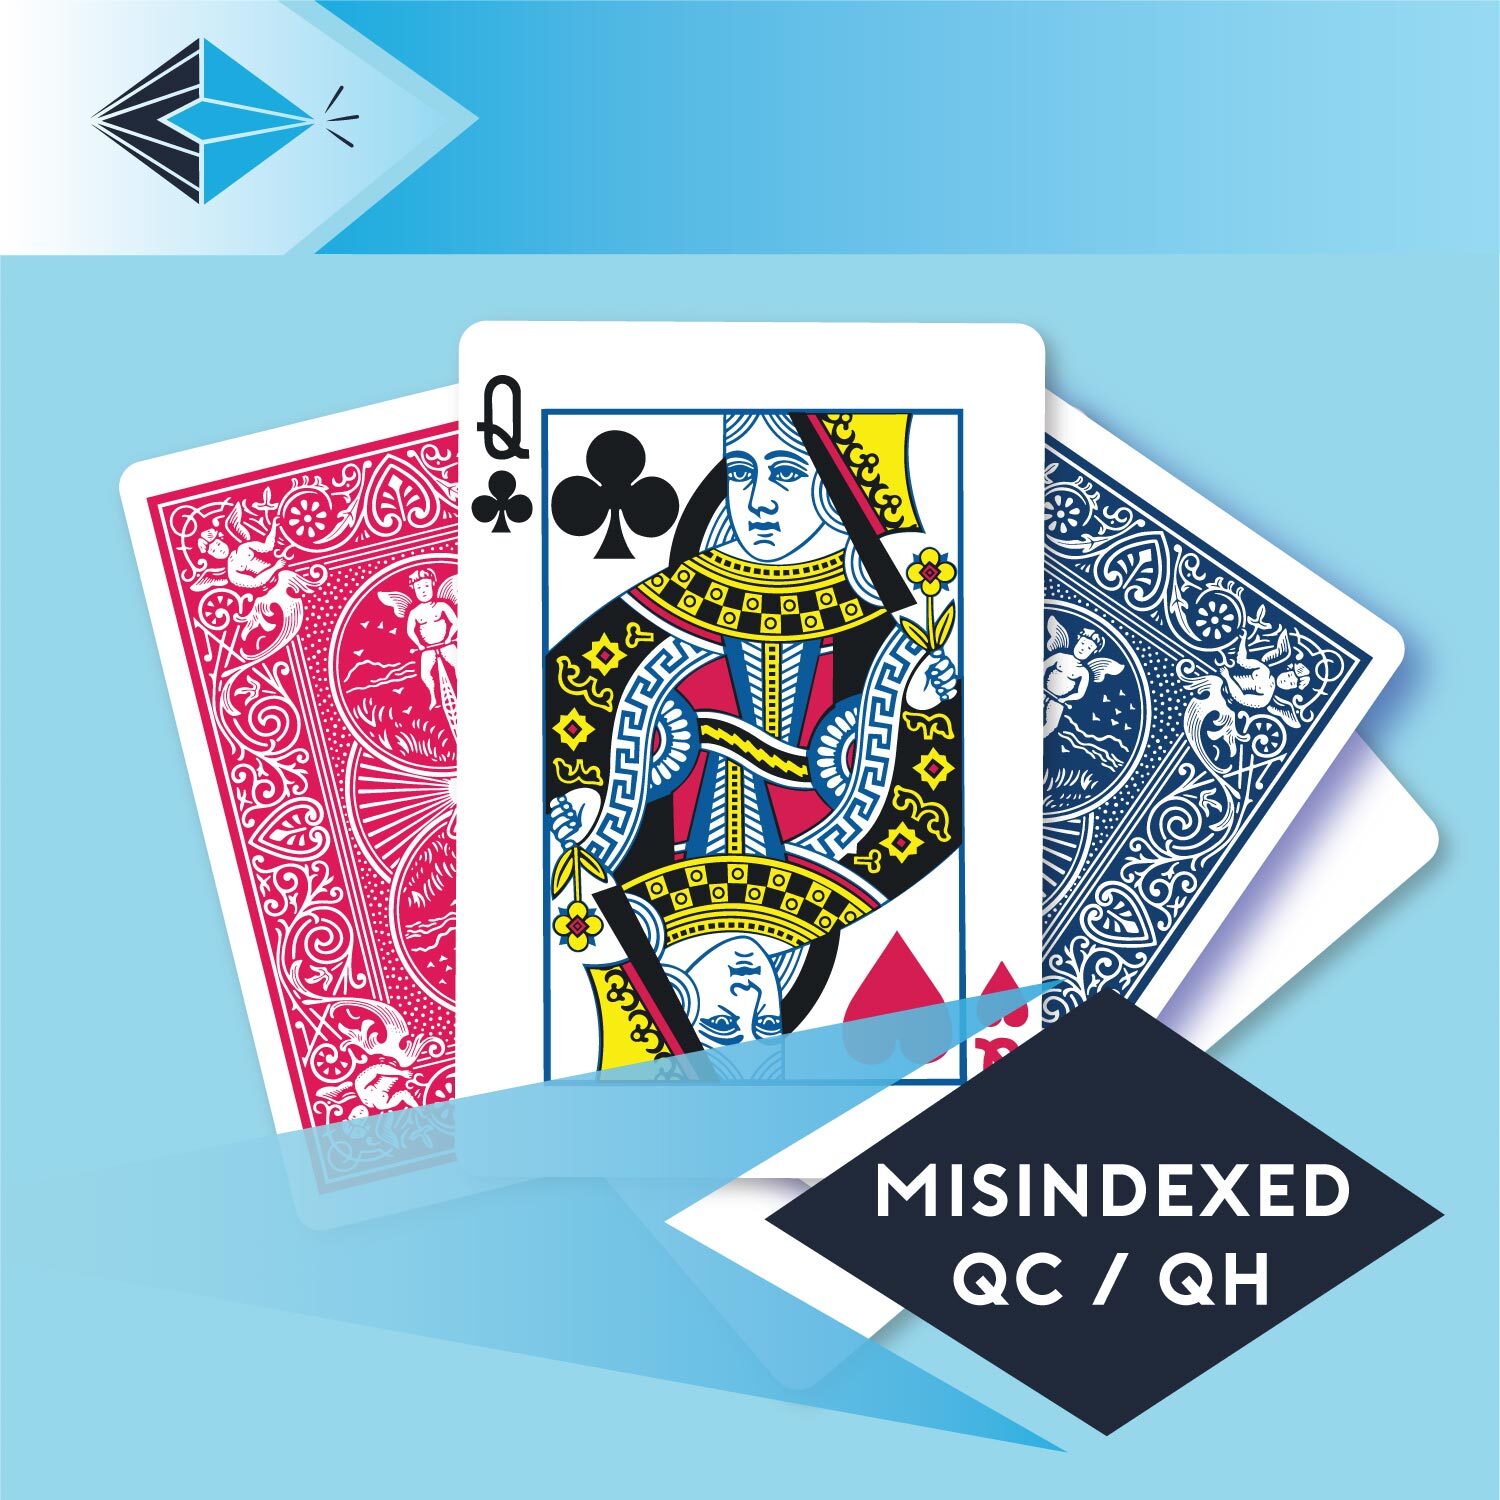 mis-indexed-queen-spades-clubs-qc-qh-playing card for magicians printing printers Stockport Manchester UK